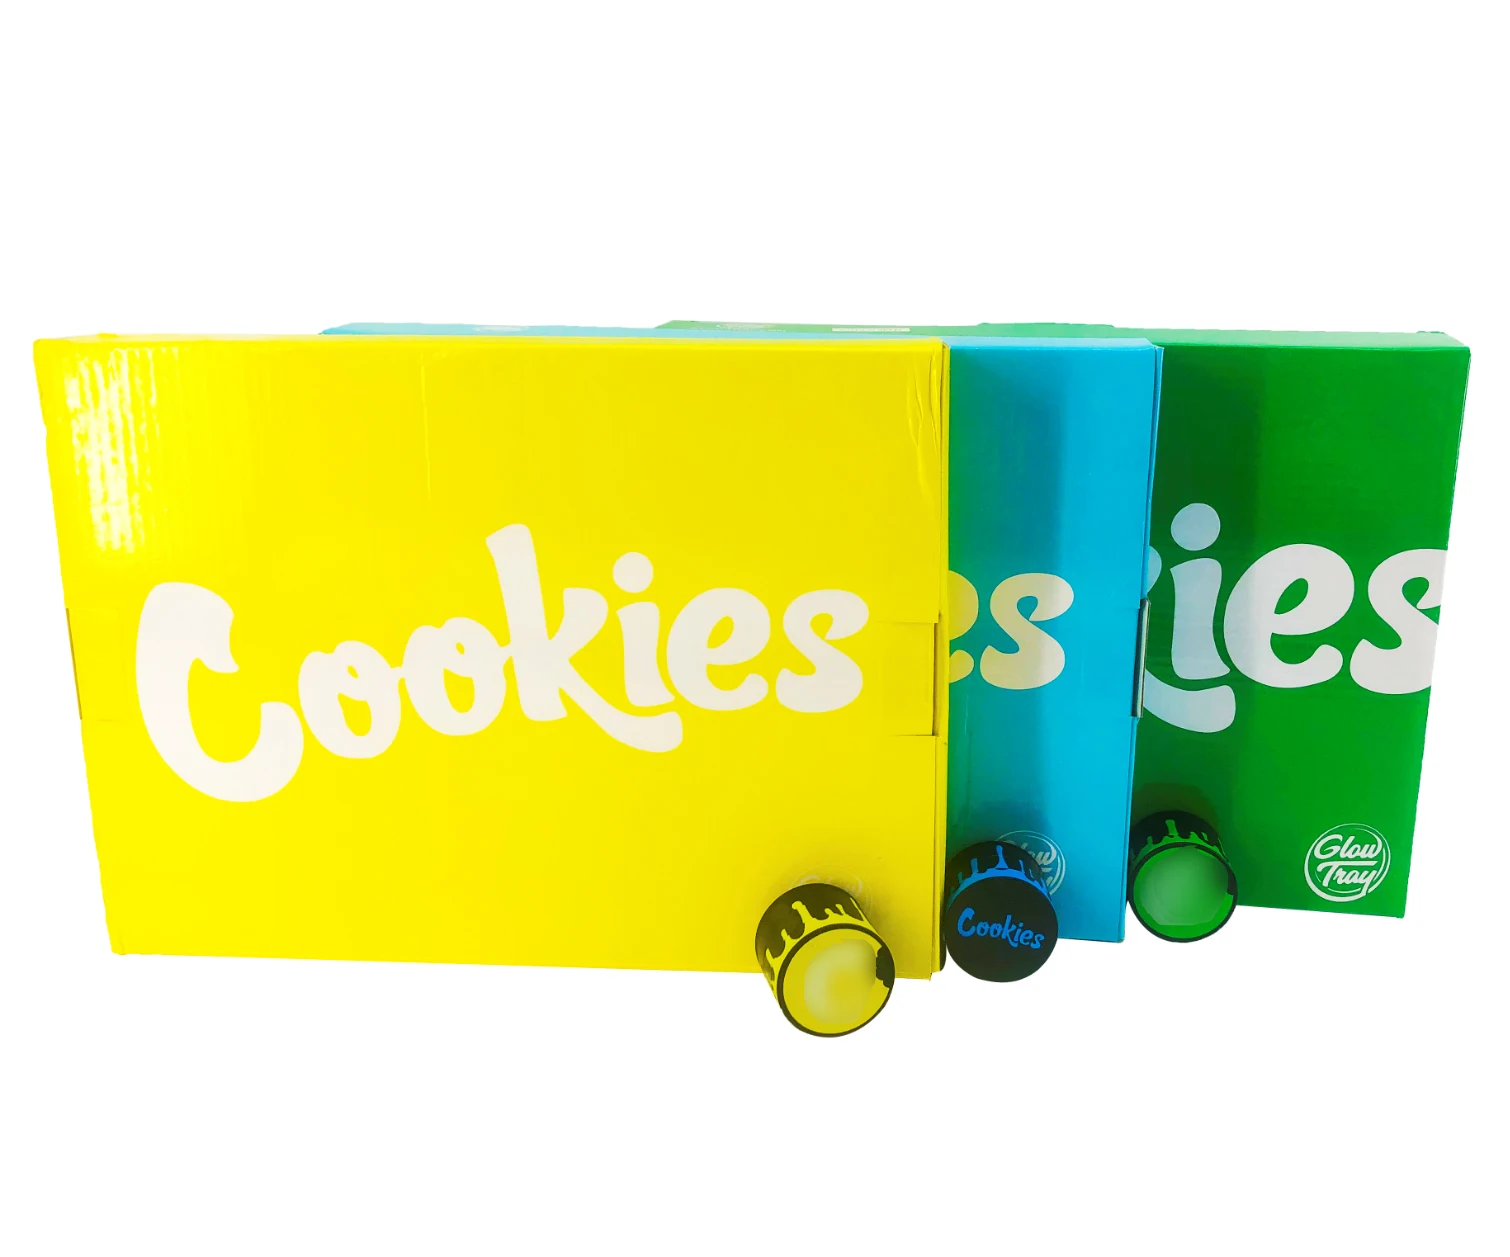 

Wholesale custom logo led rolling tray 27 cm plastic backwoods runty cookies weed tray set with grinder smoking accessories, Yellow/blue/green